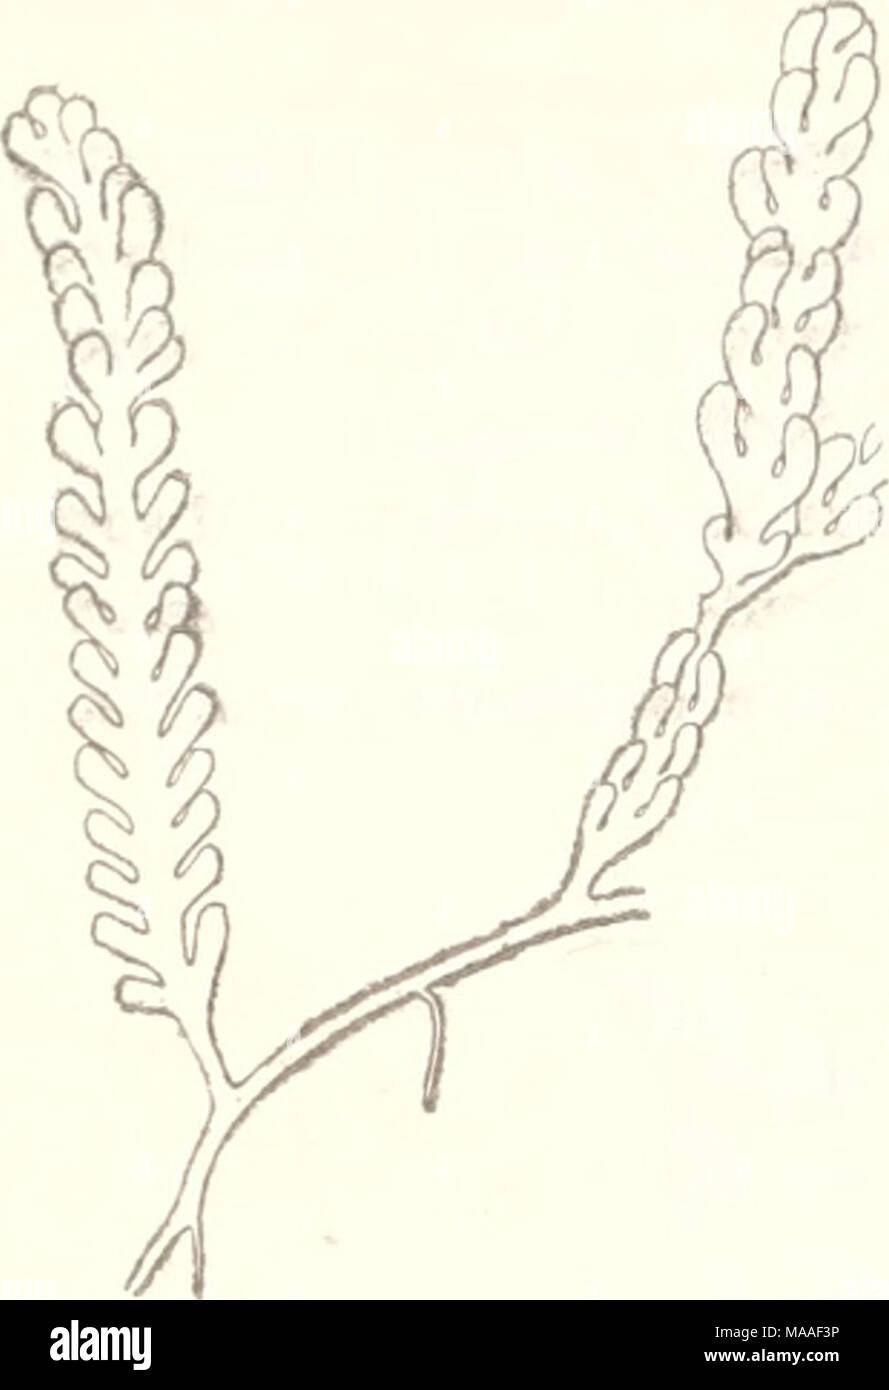 . Ecological and systematic studies of the Ceylon species of Caulerpa . Fig. 18.—C. corynephora mont. /. complanata (j.g. ag.) w. v. b. (I X 1). Geographical distrihution.- Tropical Coasts of Australia. 12.—CAULERPA L^TEVIRENS, Montagne. Syn. Catderpa racemosa var. Icetevirens, Weber v. Bosse, Monographie des Caulerpes, p. 366. f. laxa (Greville). Weber v. Bosse, loc. cit. p. 367. Greville, Remarks on some Algse bel. to the Gen. Caulerpa, PI. II., figs. 1, 2. Ann. and Magazine of Nat. Hist., vol. XII, sec. ser. (1853). Caulerpa laxa, Grev. Murray, Catalogue p. 38. Exsicc. Harvey, Ceylon Algae  Stock Photo